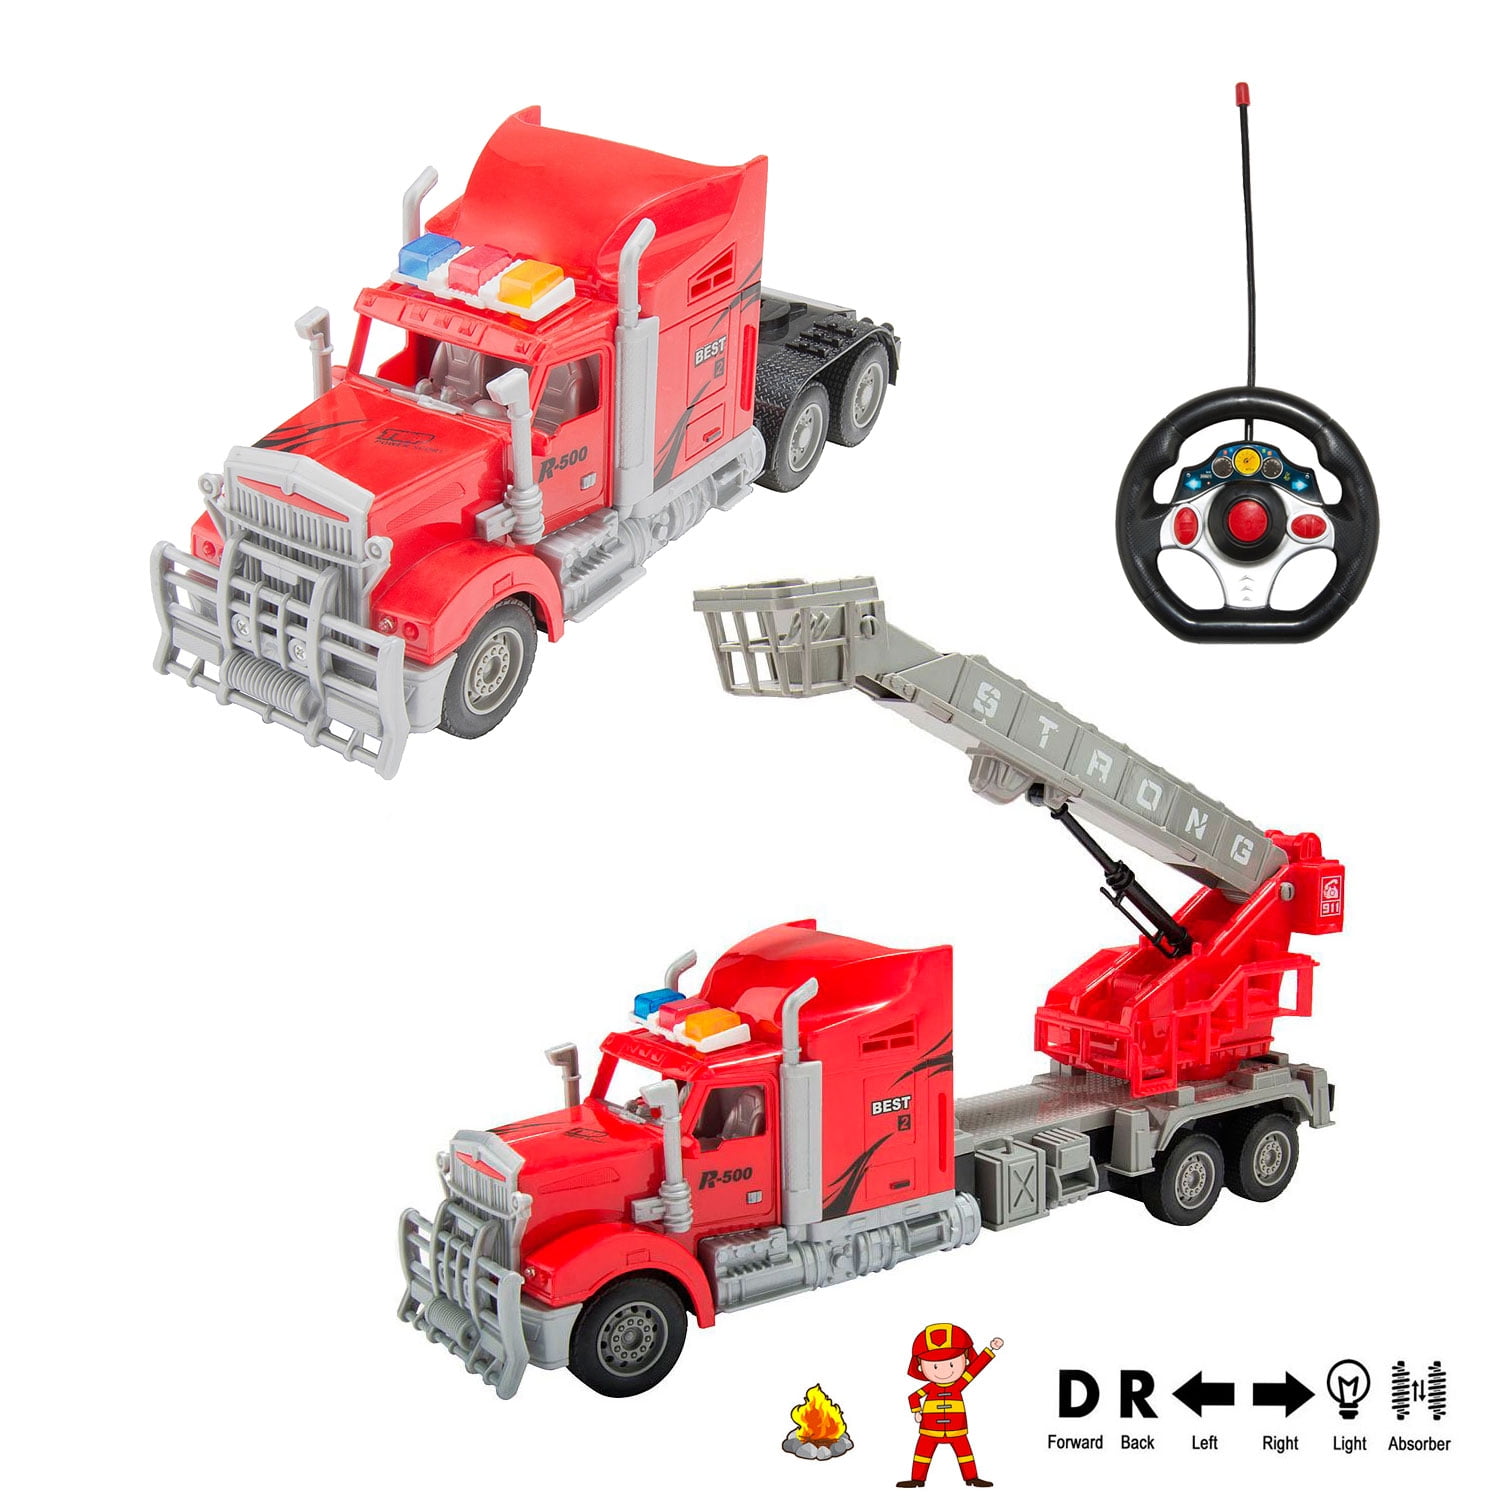 Big Plastic Toy Fire Truck for Toddlers Boys and Girls Red Red Fireman Engine Vehicle with Rescue Ladders for Indoor and Outdoor Imaginative Play 